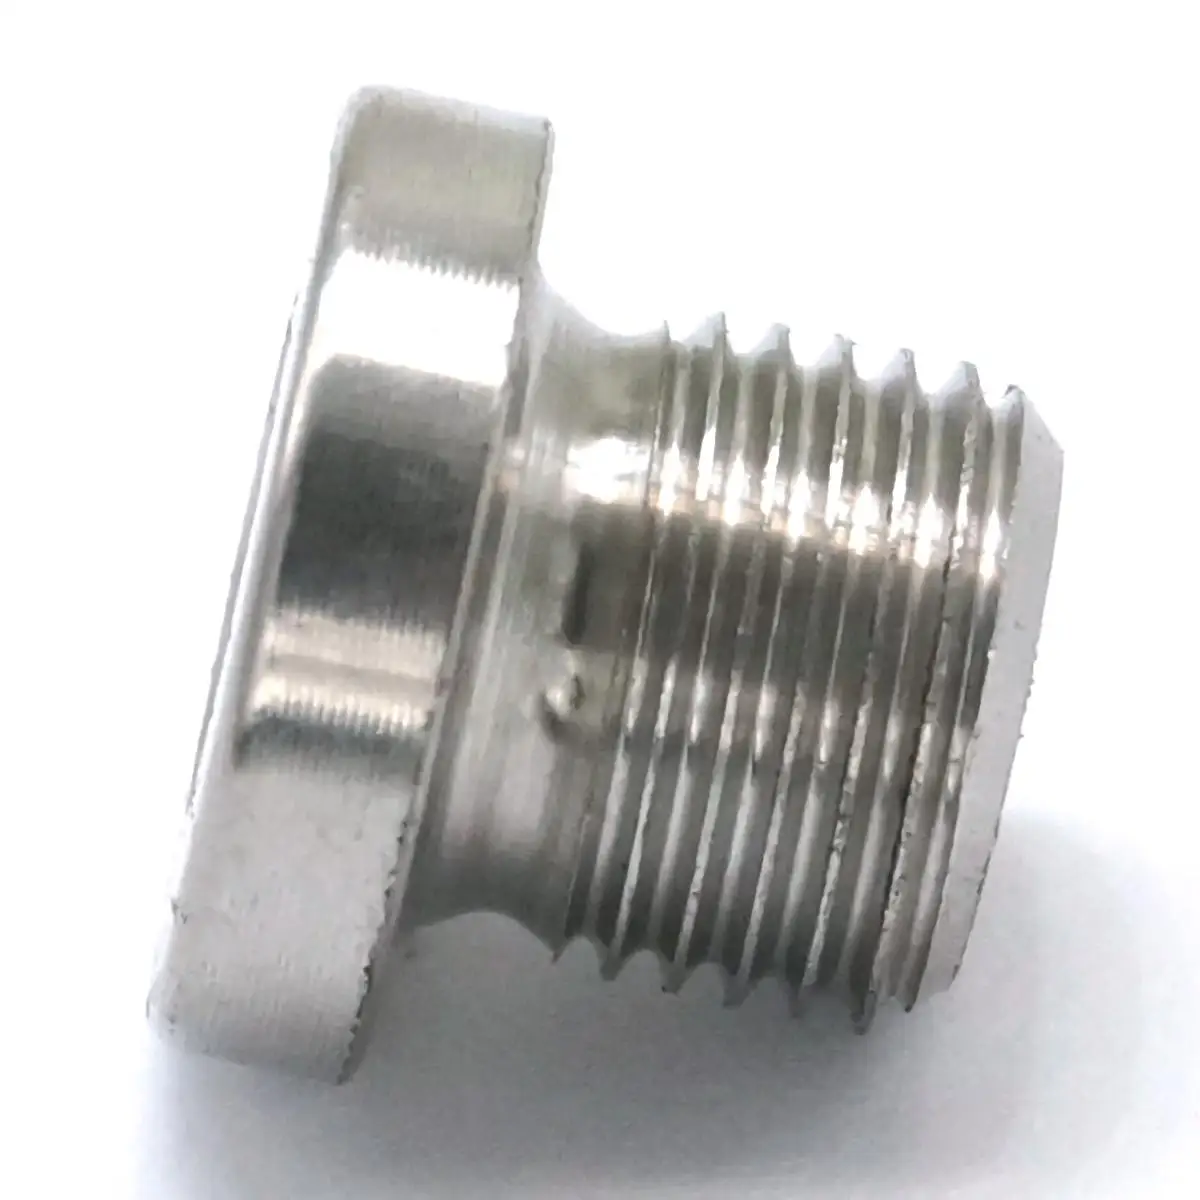 M10x1mm Male SS304 Countersunk End Plug With Flange Internal Hex Head Socket 